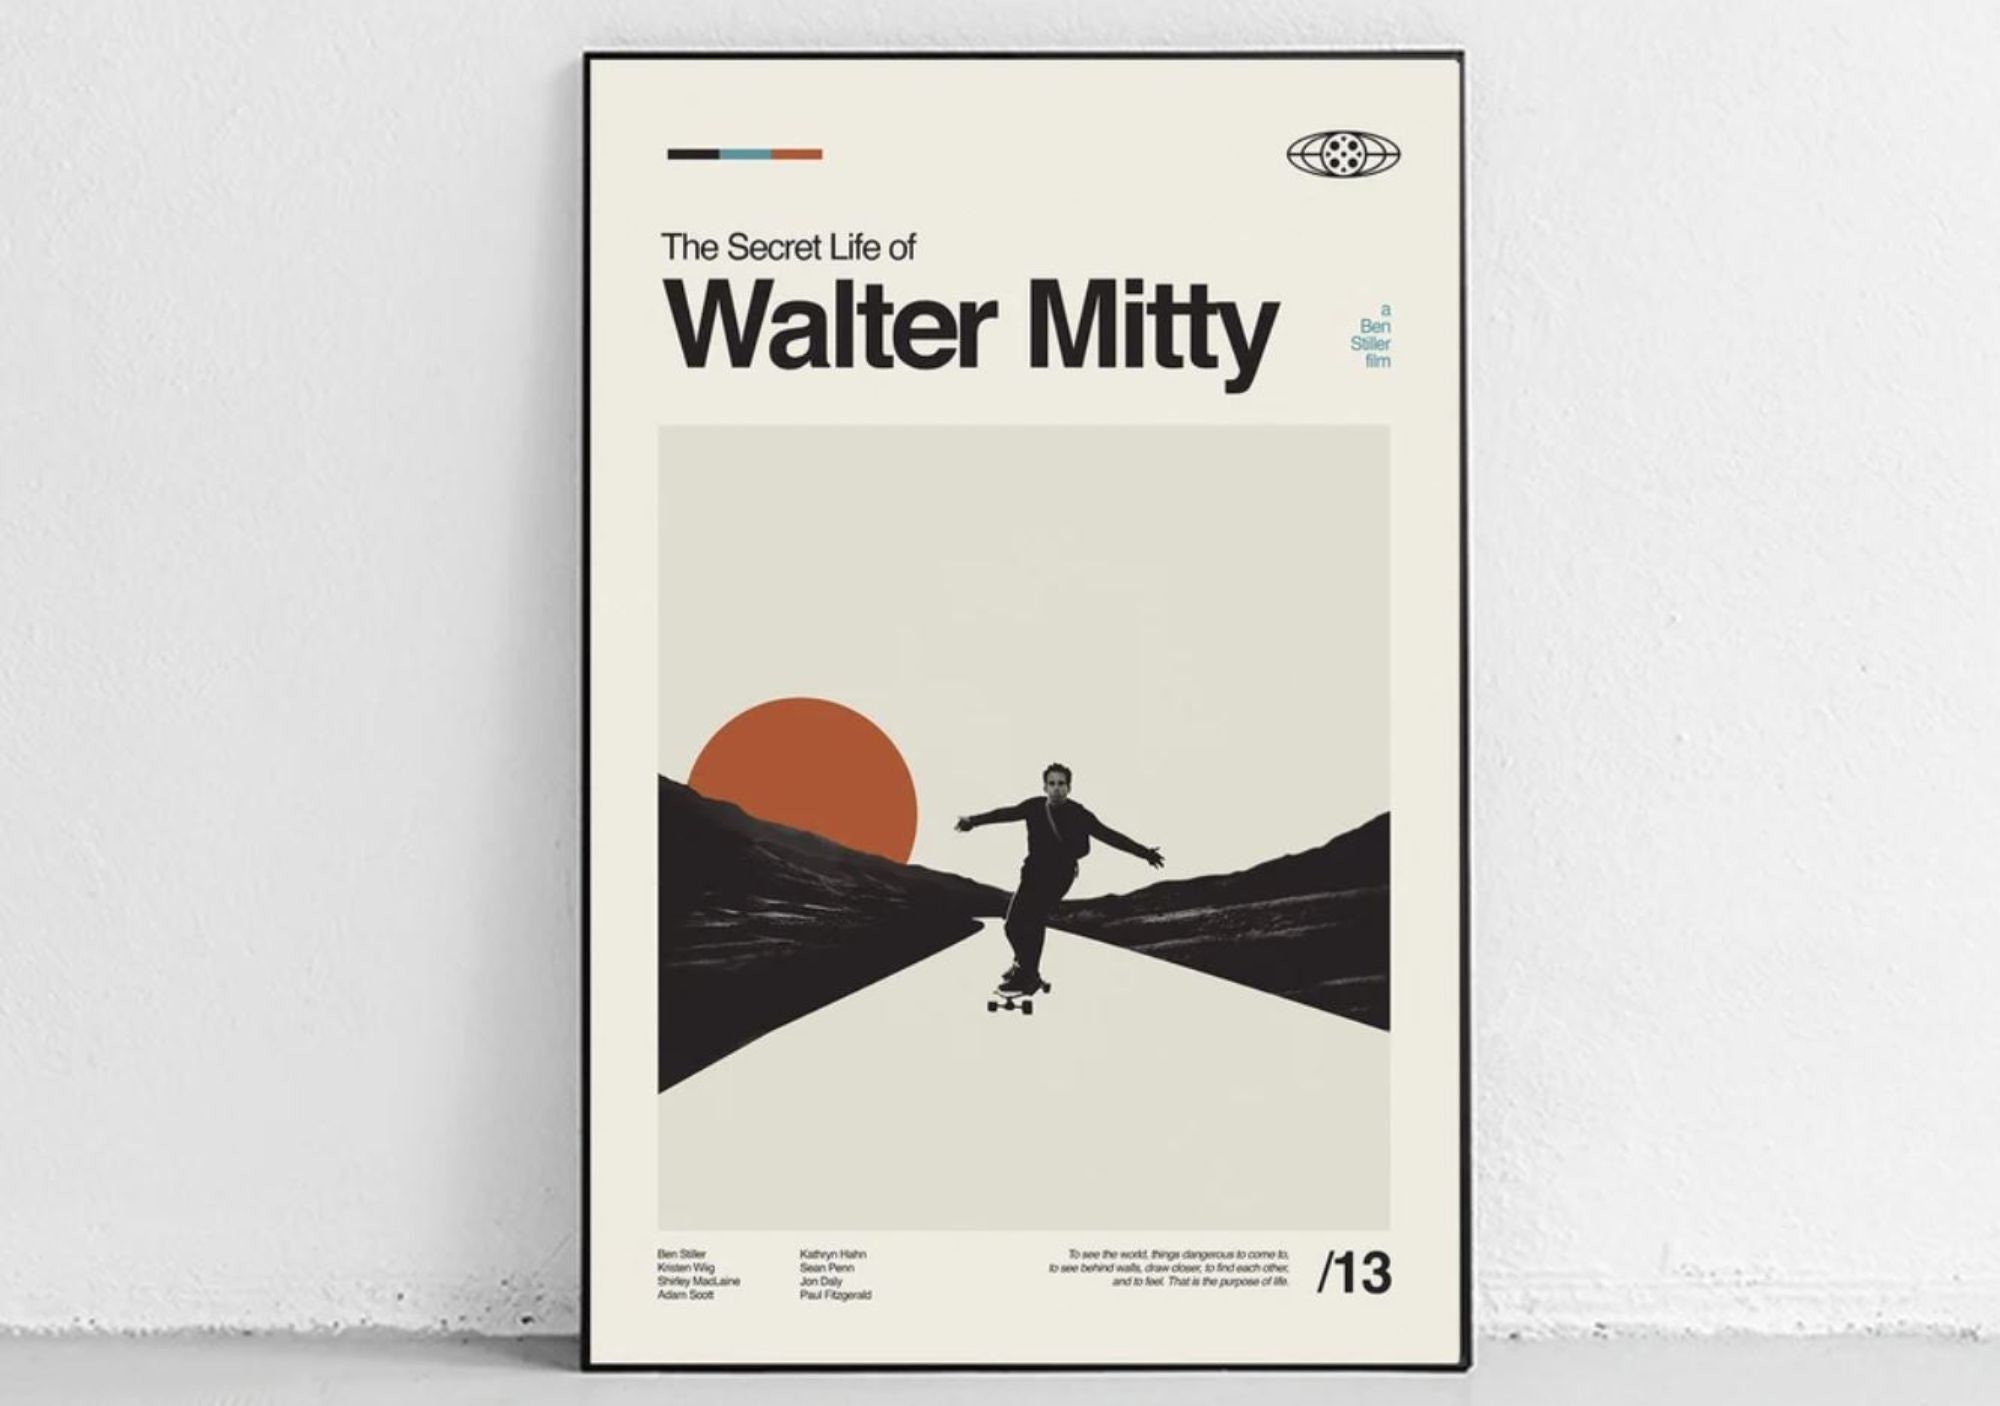 Discover The Secret Life of Walter Mitty -Midcentury Modern Premium Matte Vertical Poster